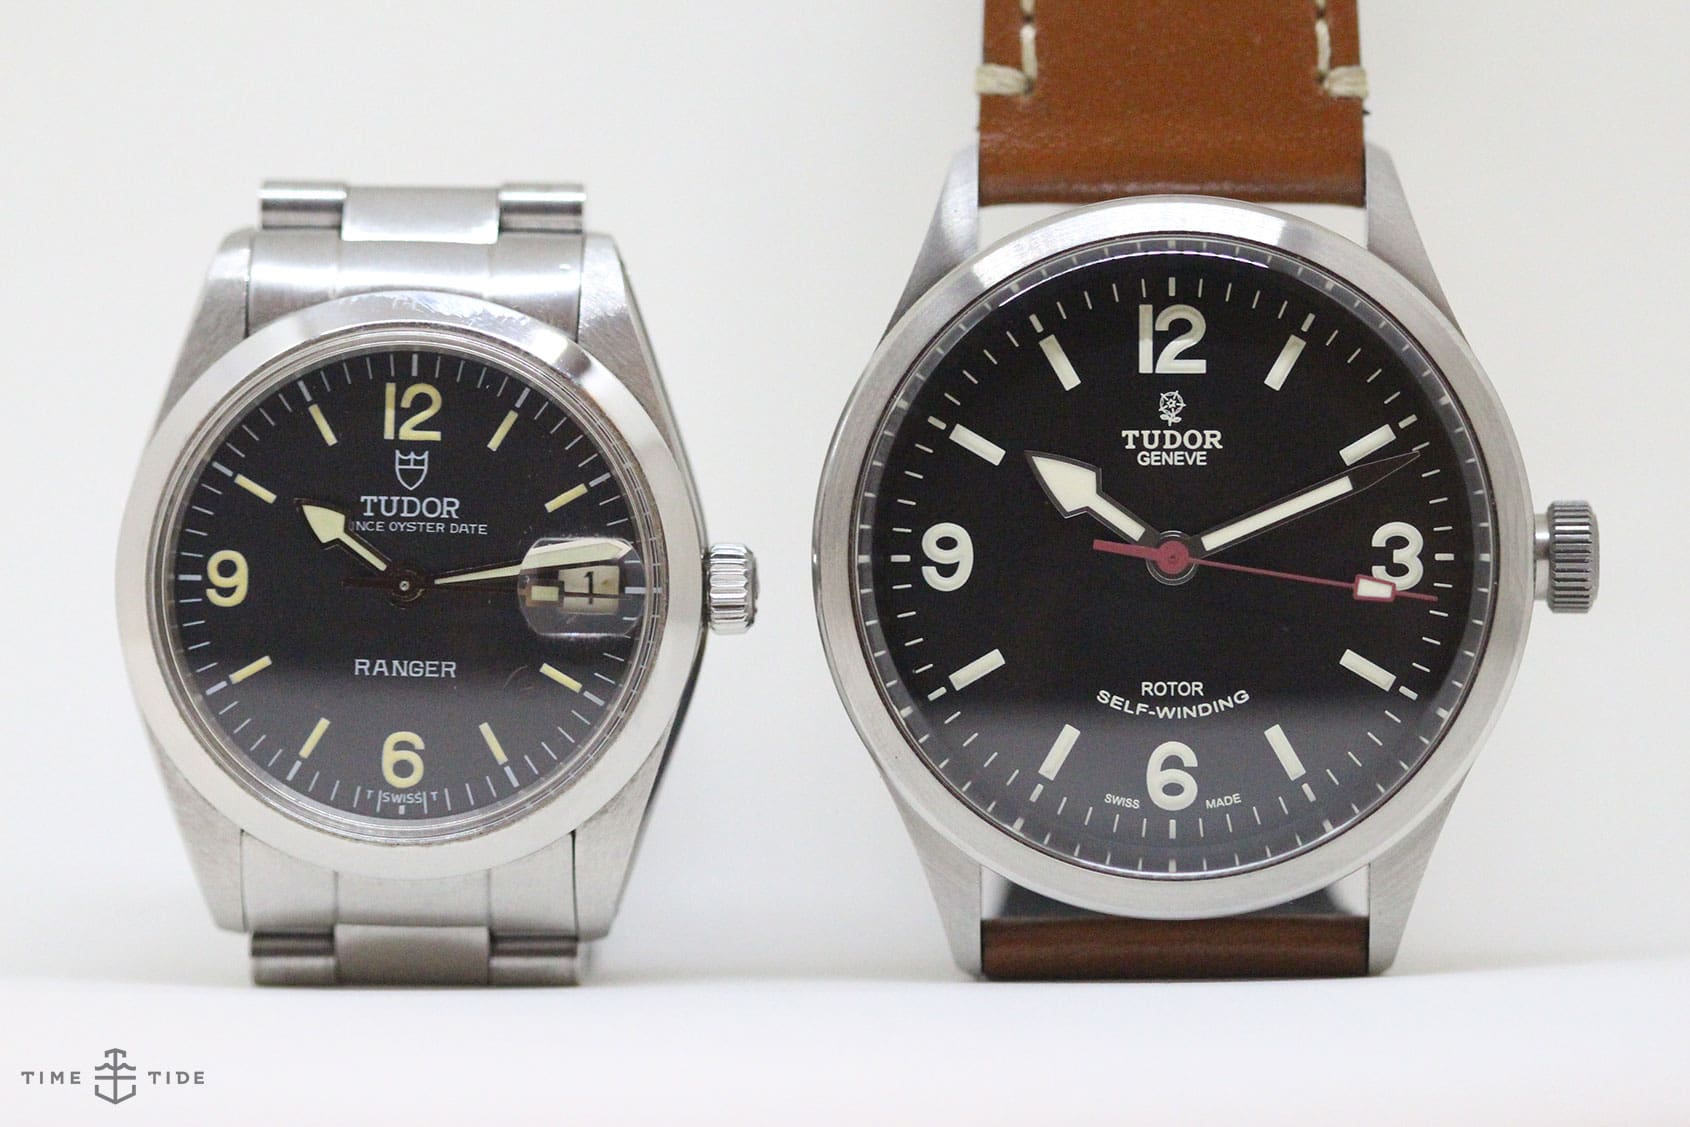 IN-DEPTH: The Tudor Heritage Ranger and the original Ranger side-by-side